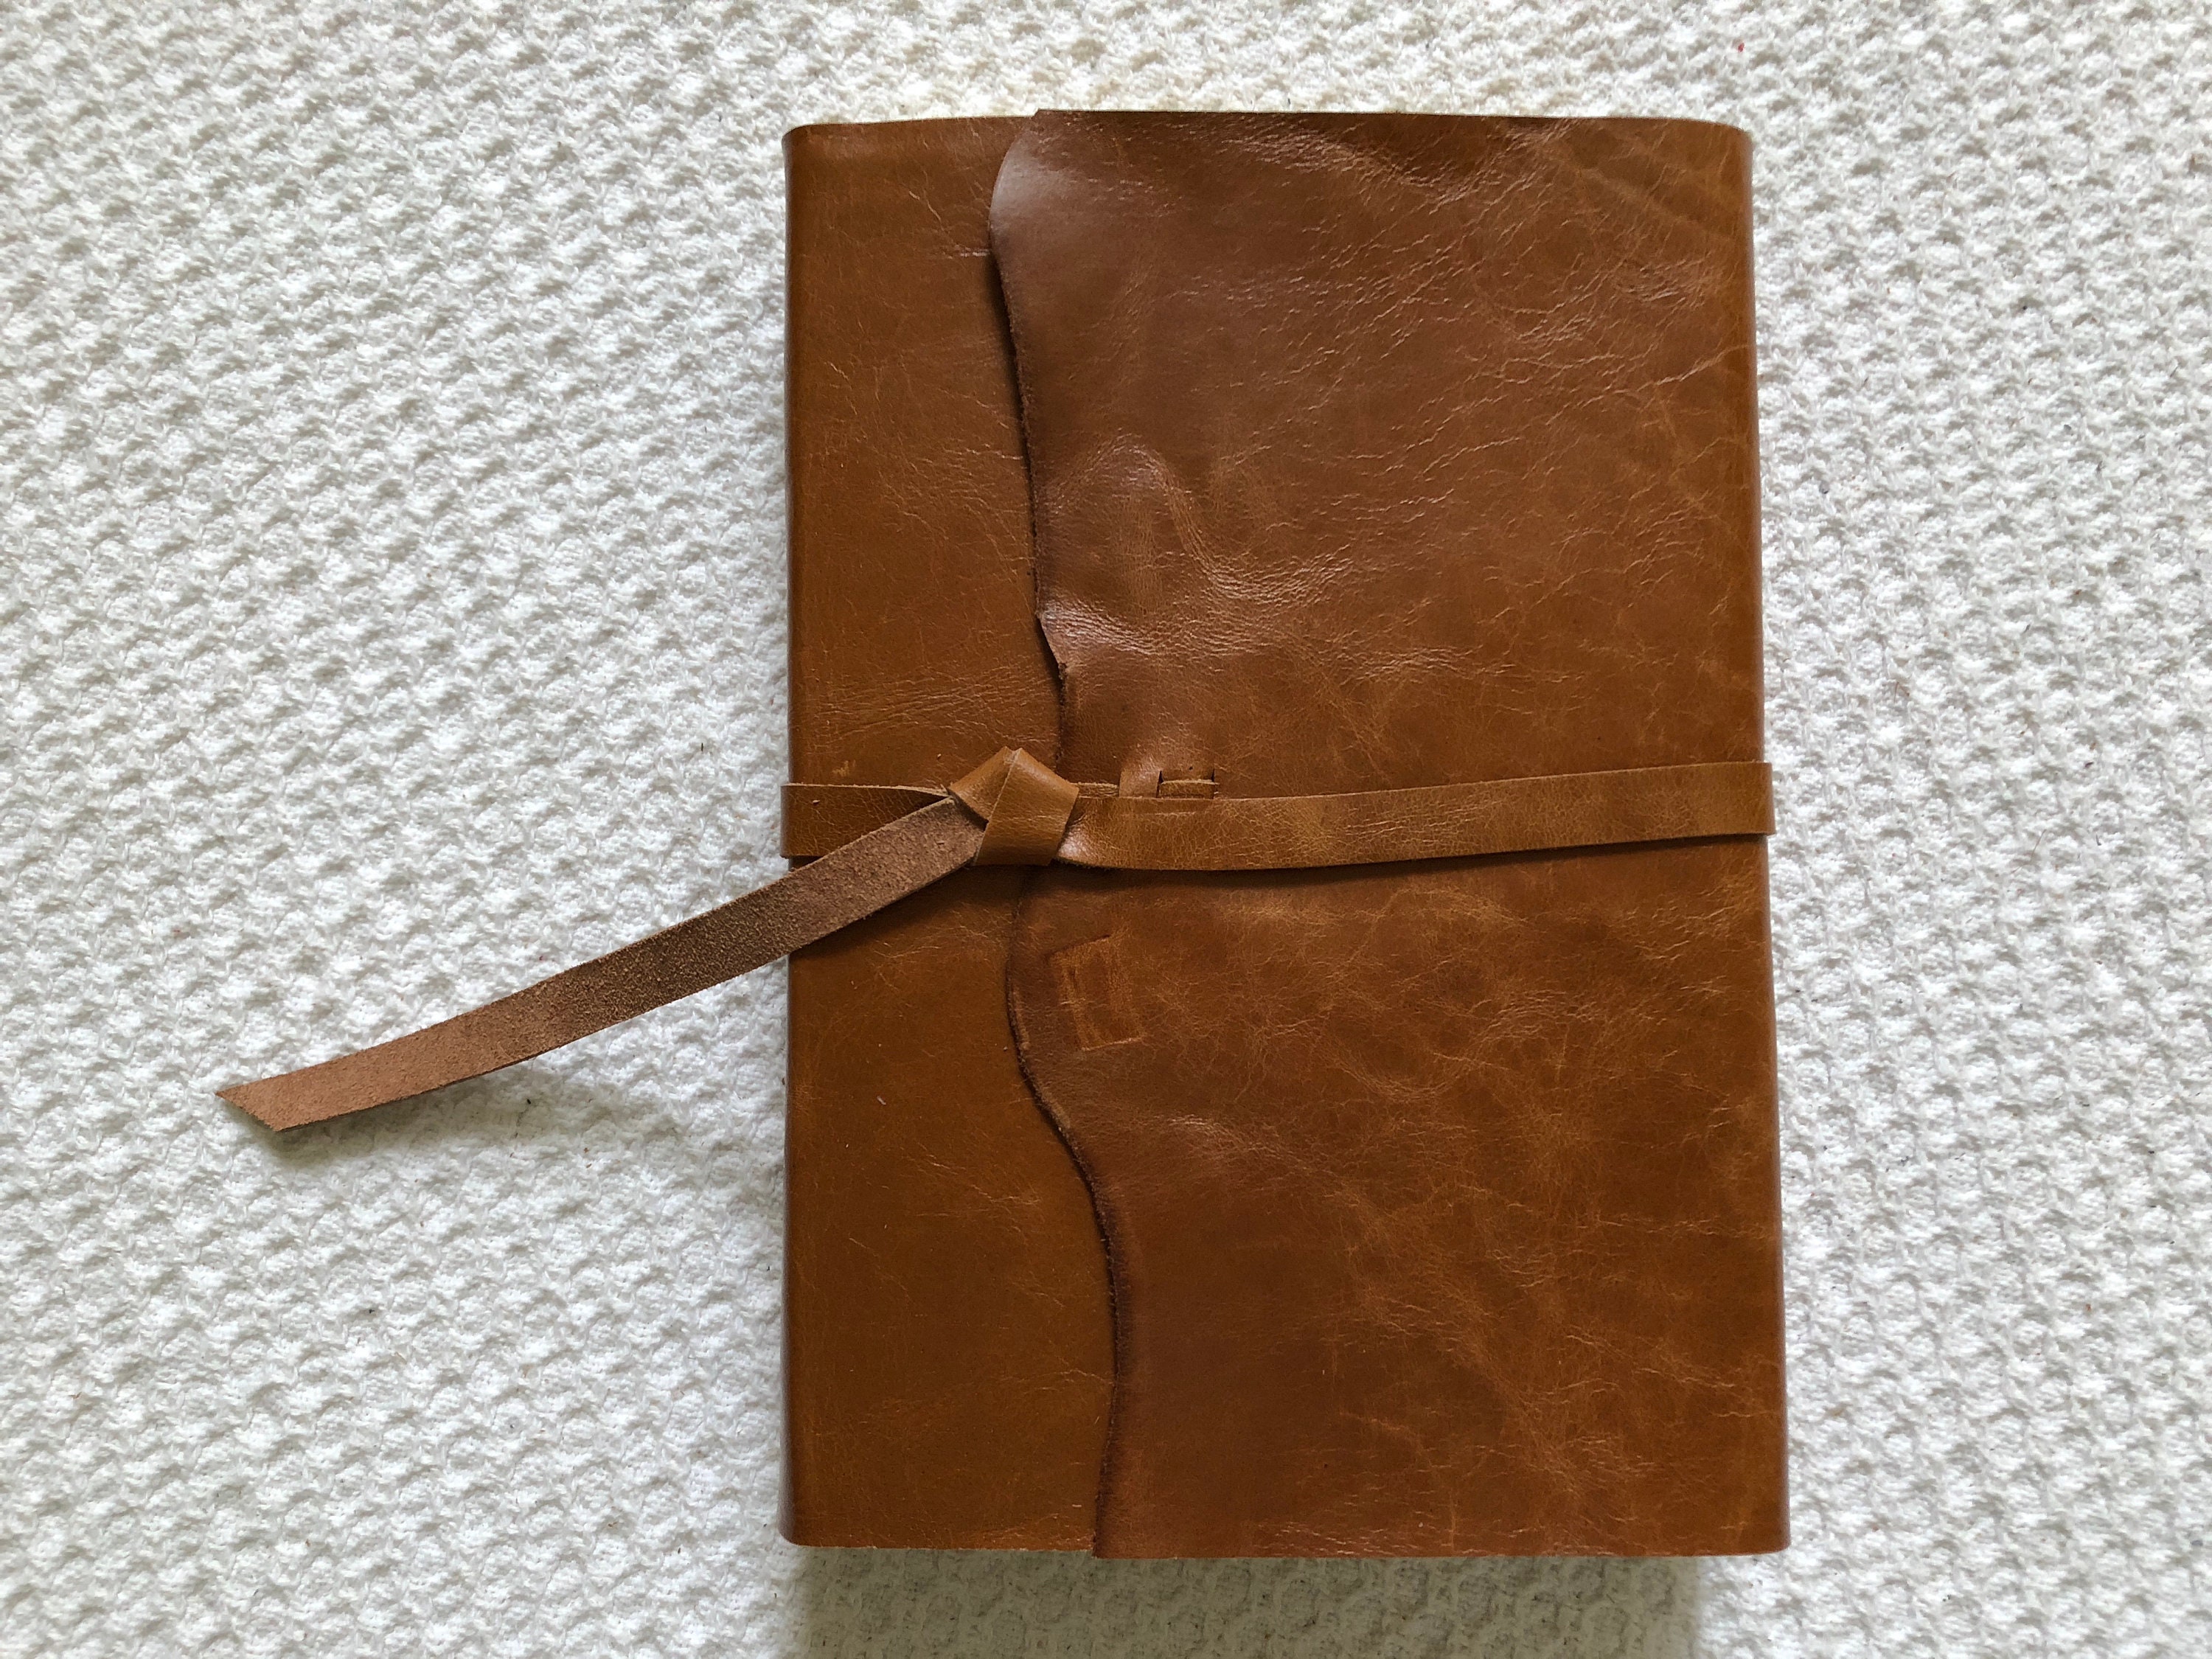 Esv Study Bible Custom Recovered Covered Cowhide Leather With Etsy